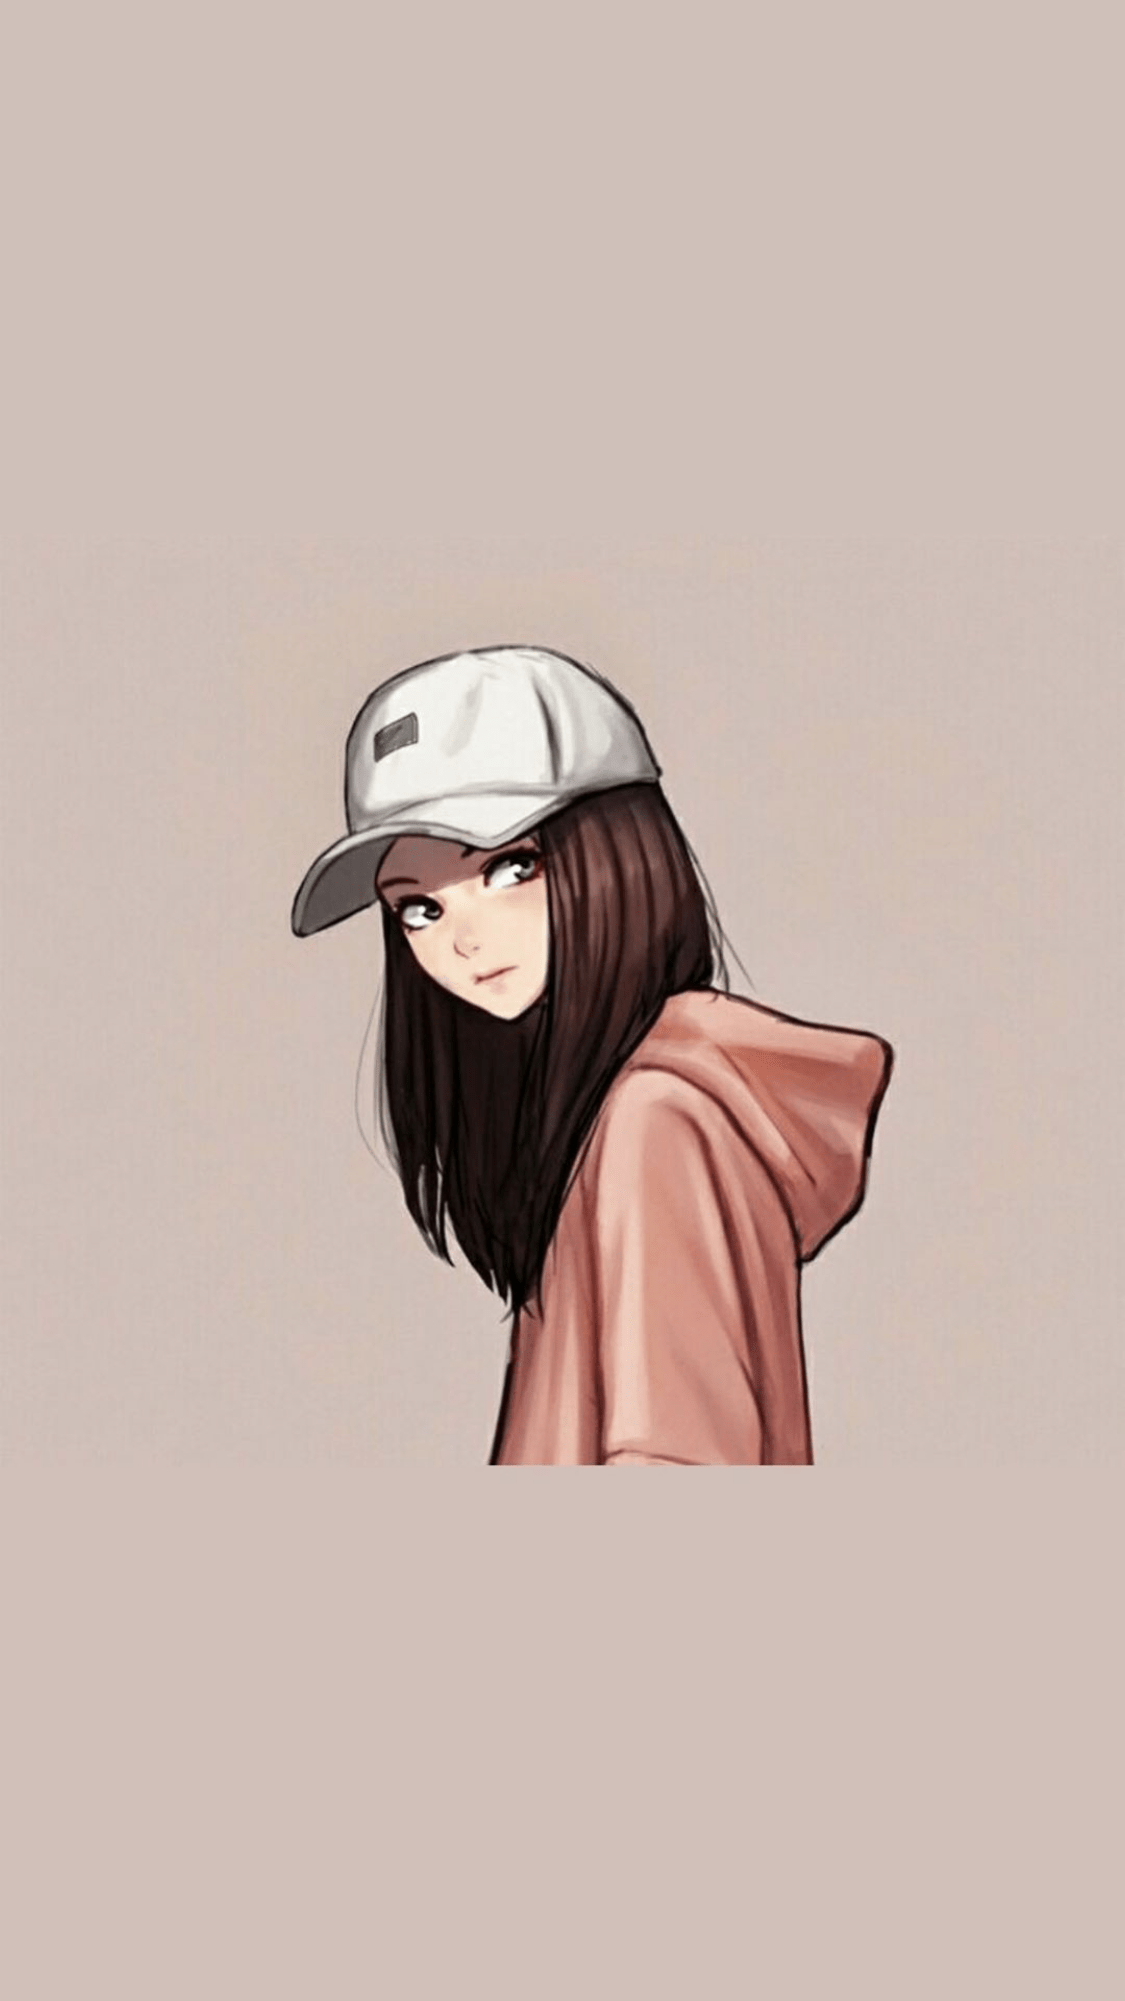 A girl with black hair wearing white hat - Cute, anime girl